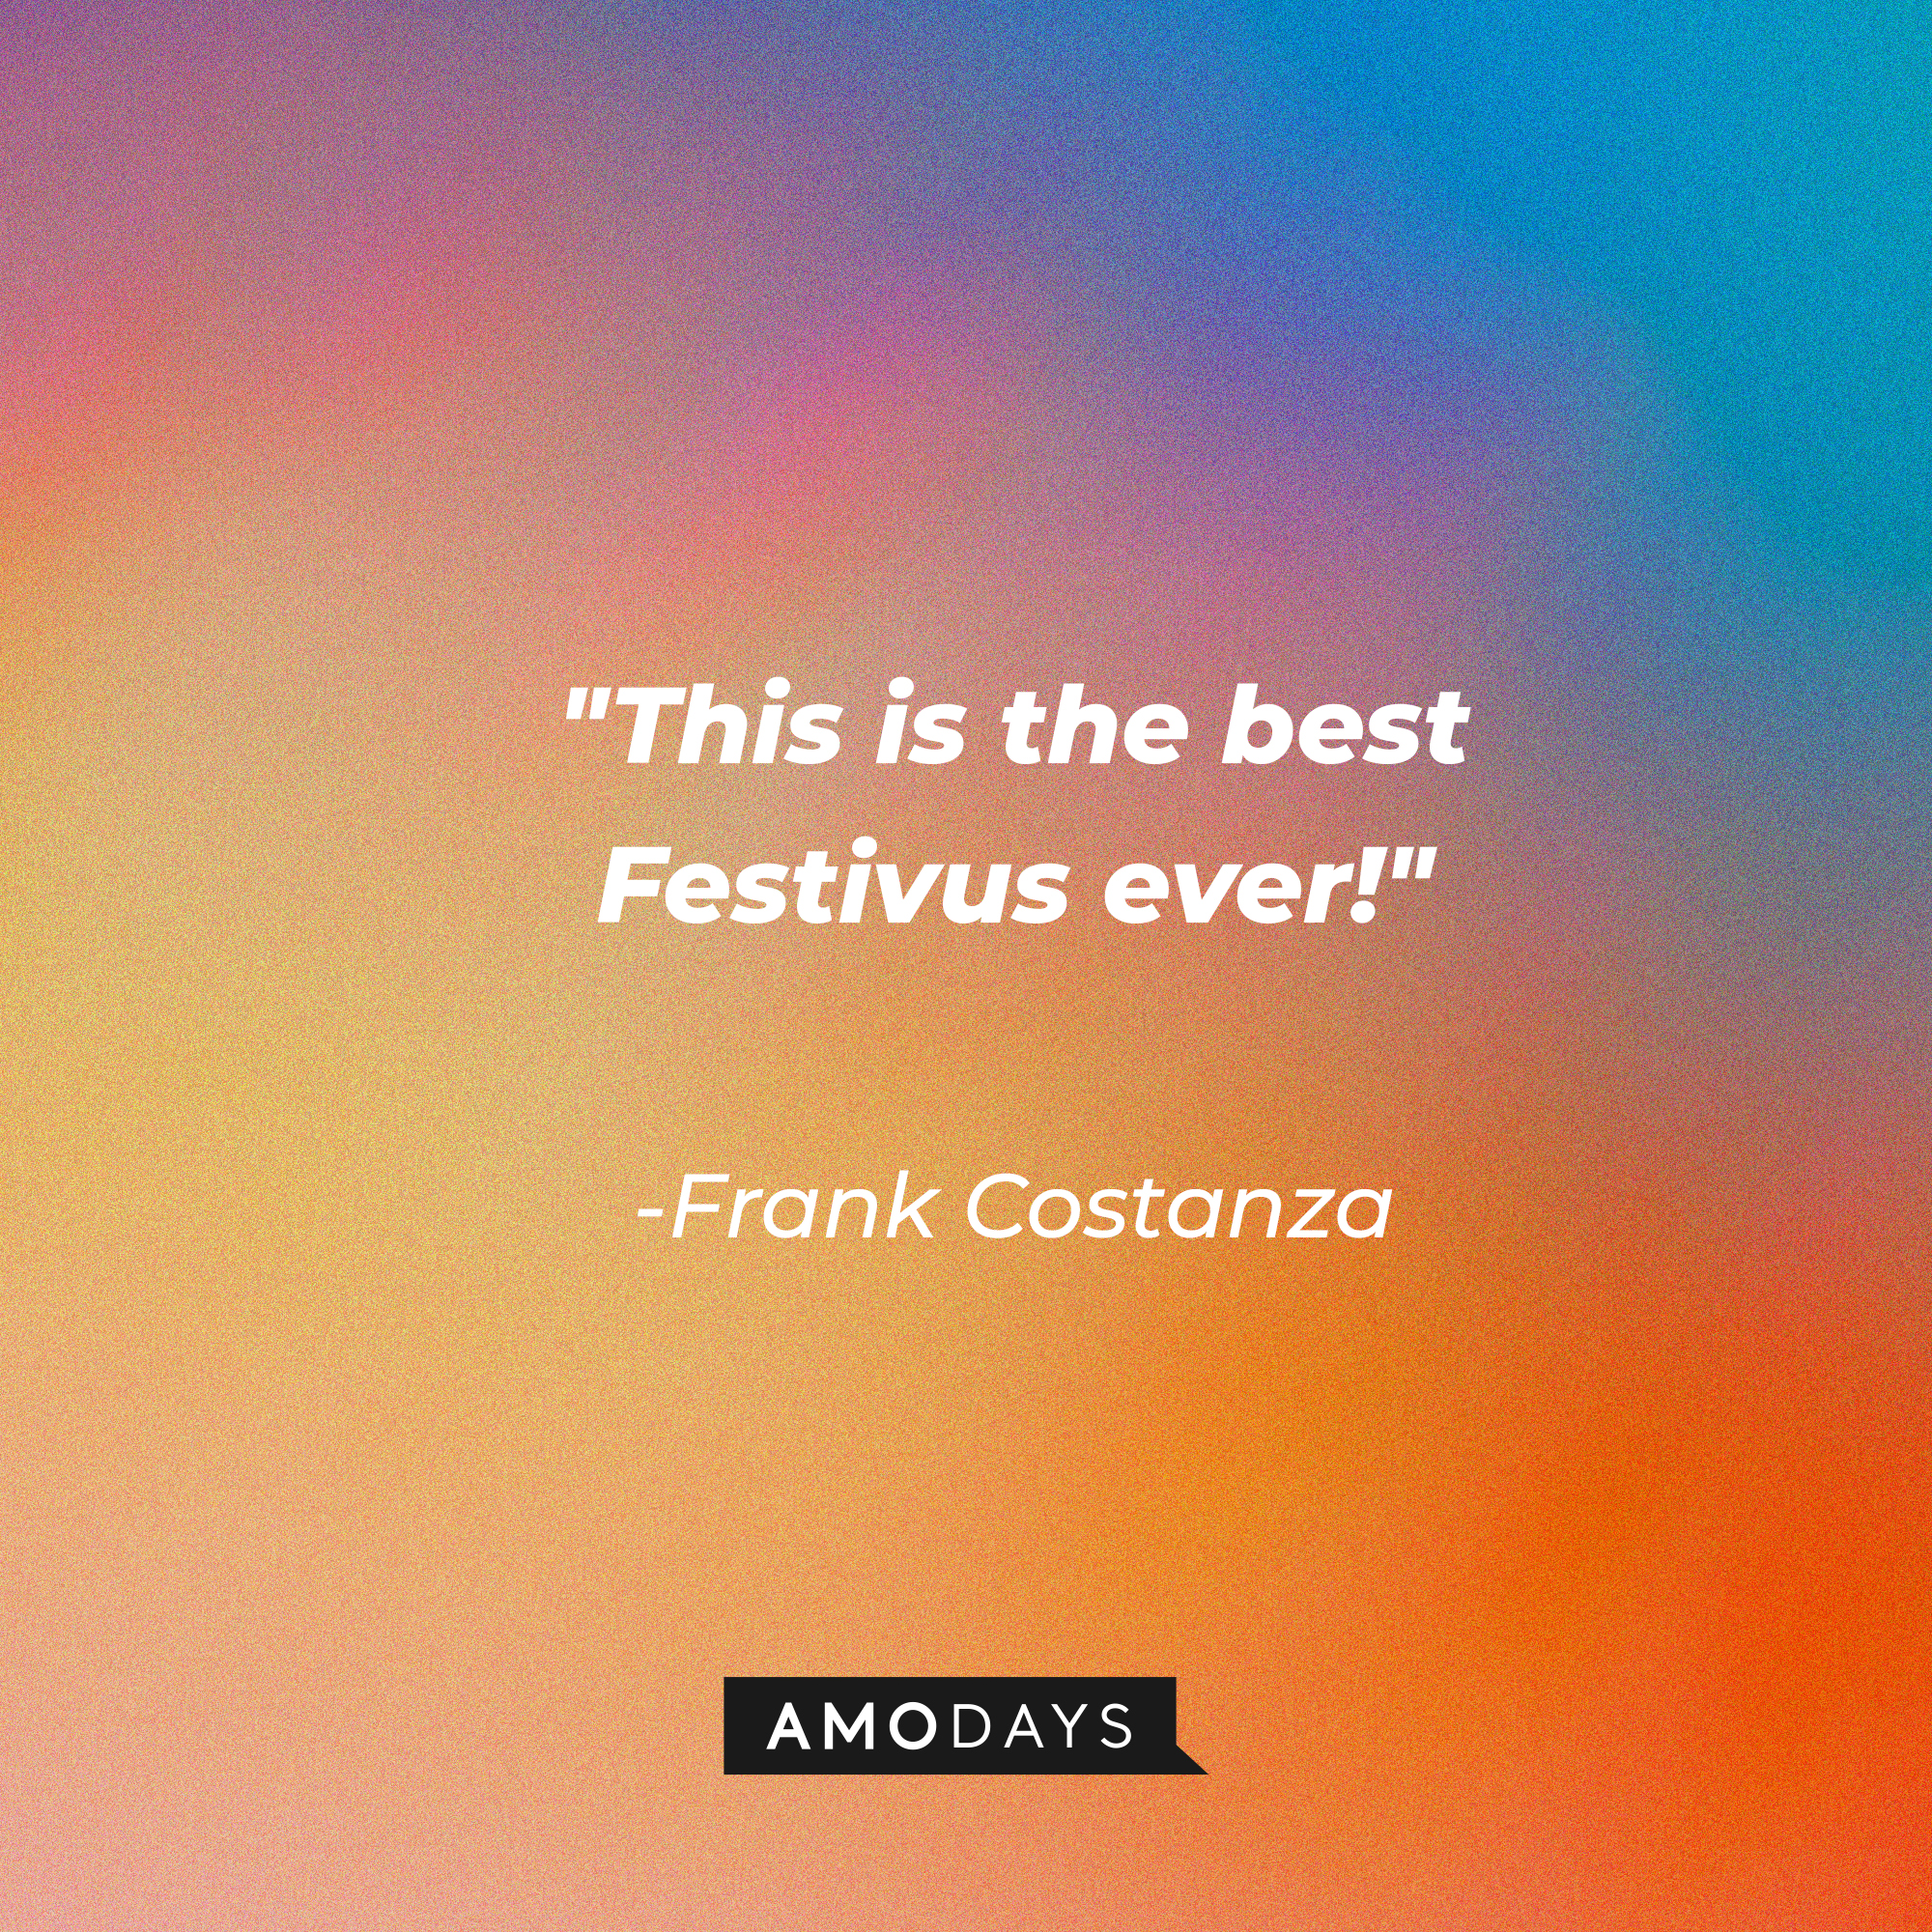 A photo with Frank Costanza's quote, "This is the best Festivus ever!" | Source: Amodays